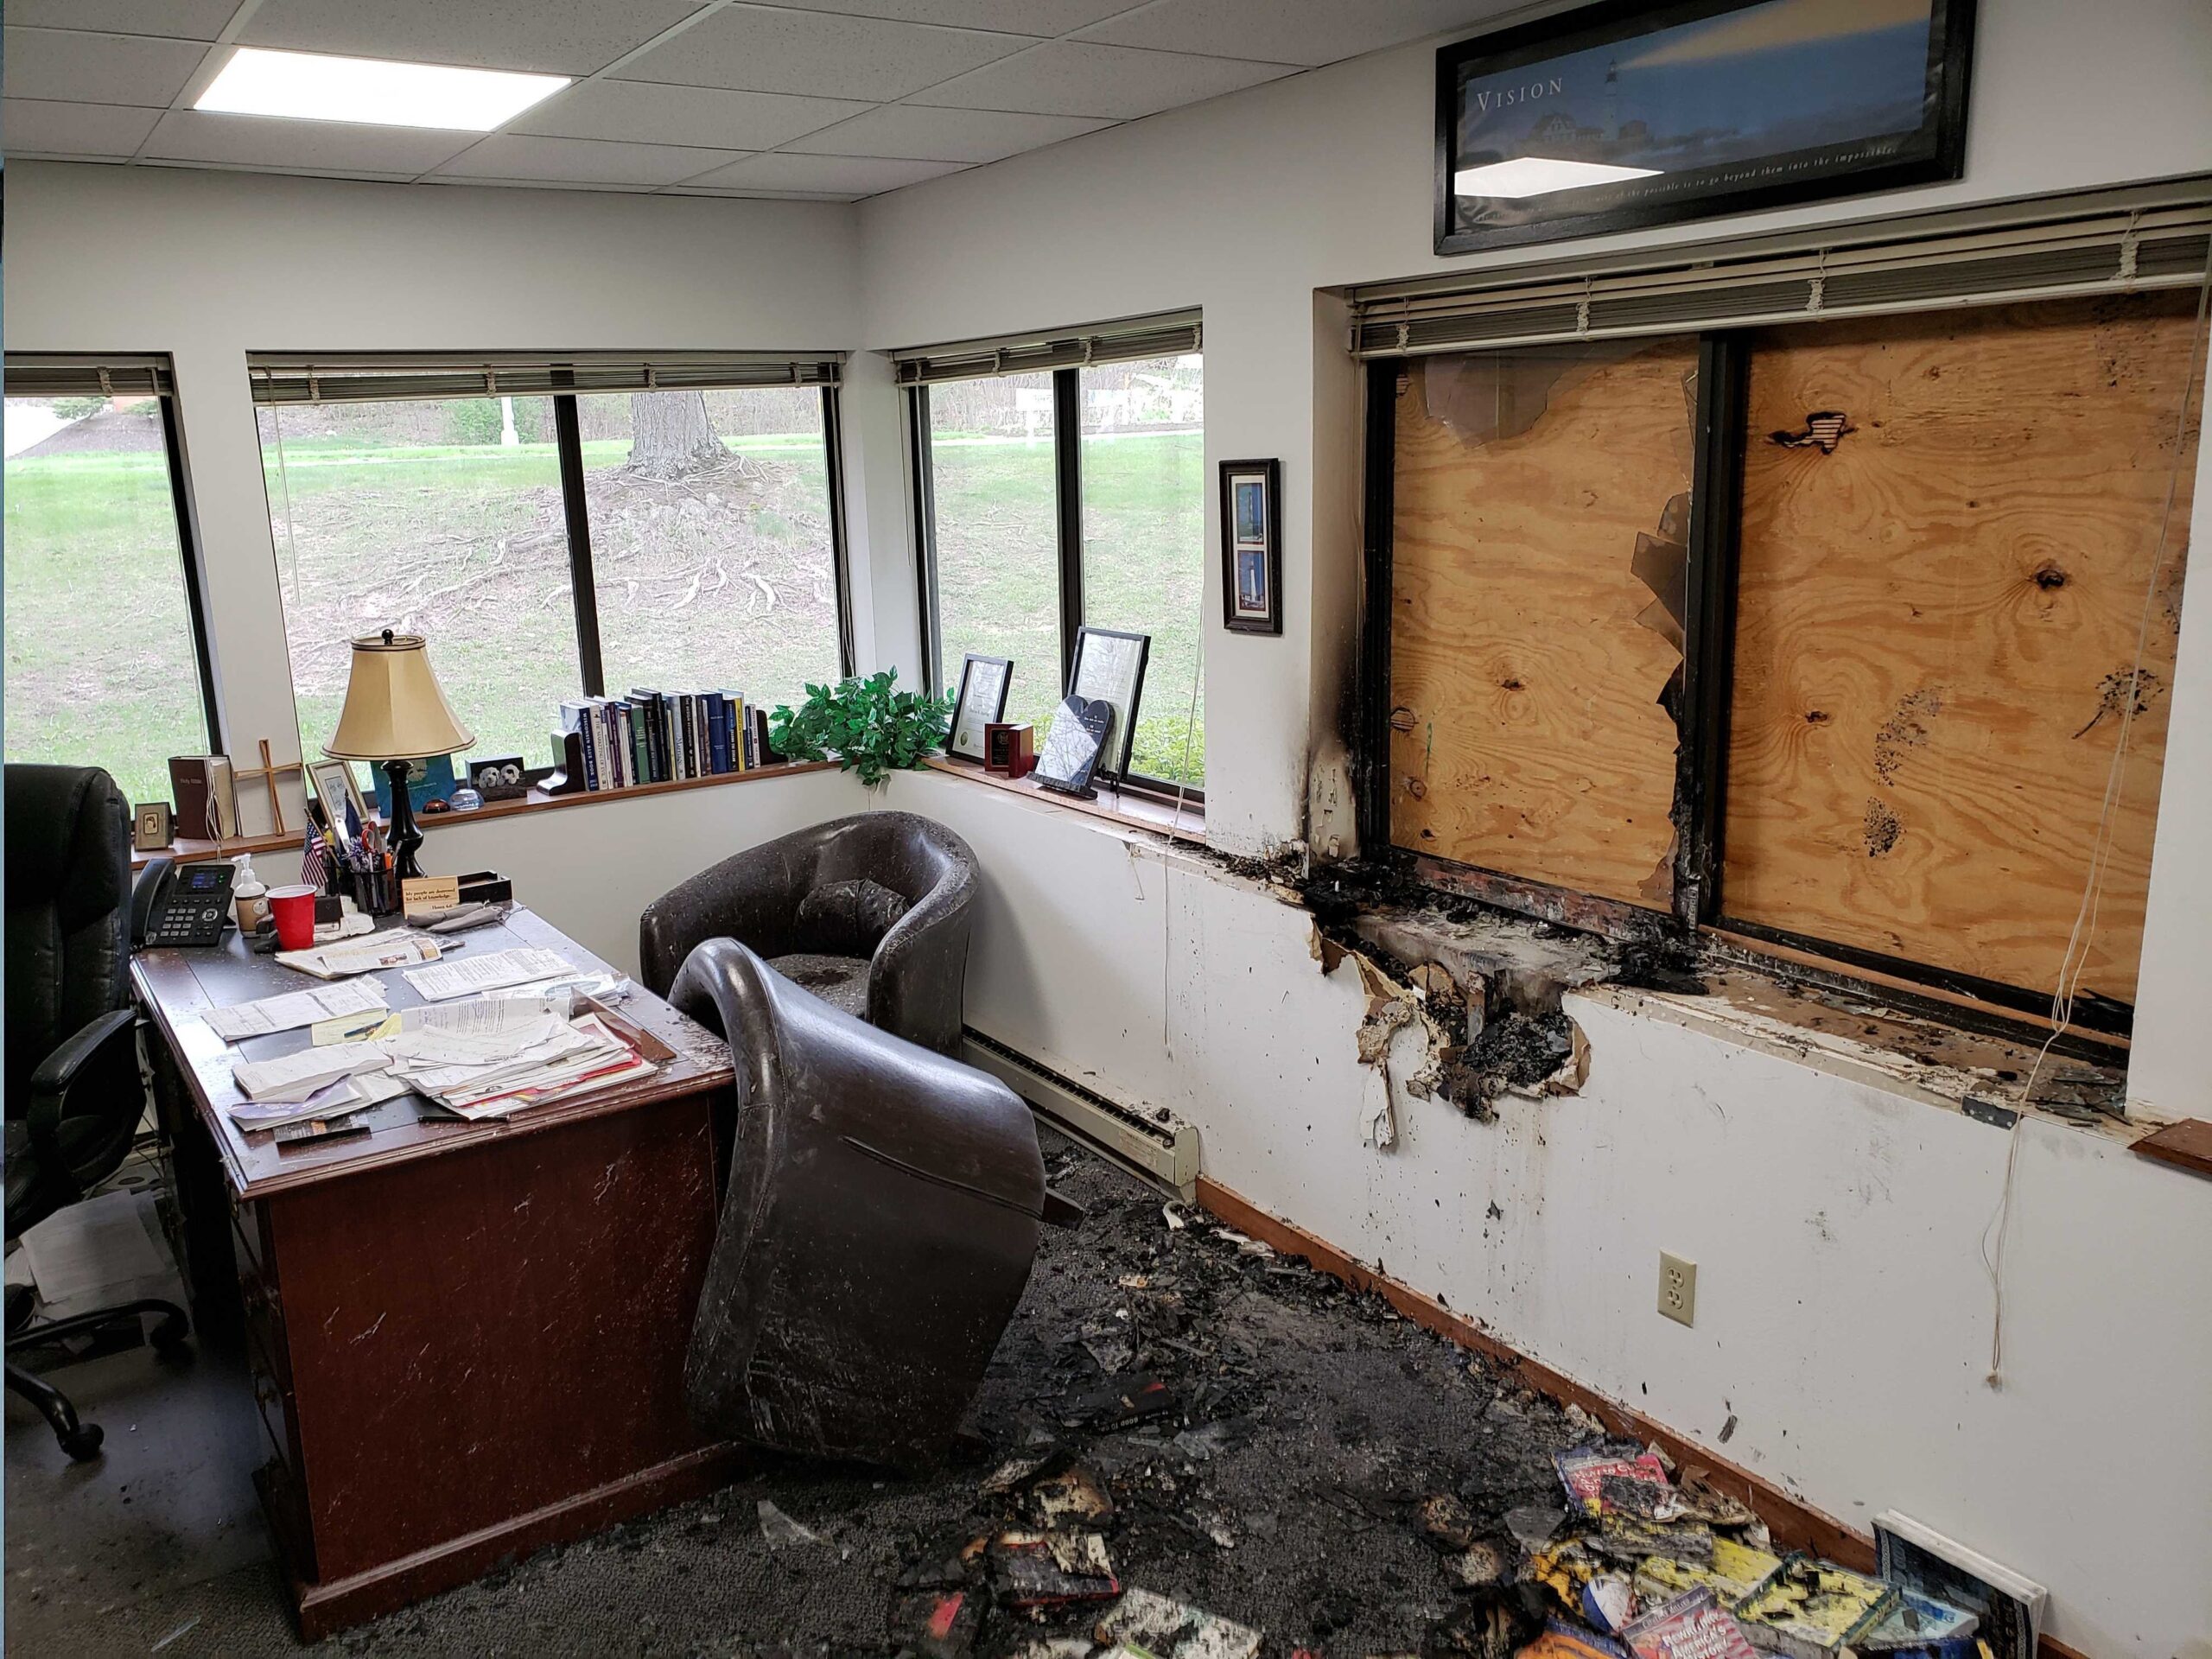 Damage to the inside and outside of the Wisconsin Family Action's offices in Madison is being investigated as "suspicious"